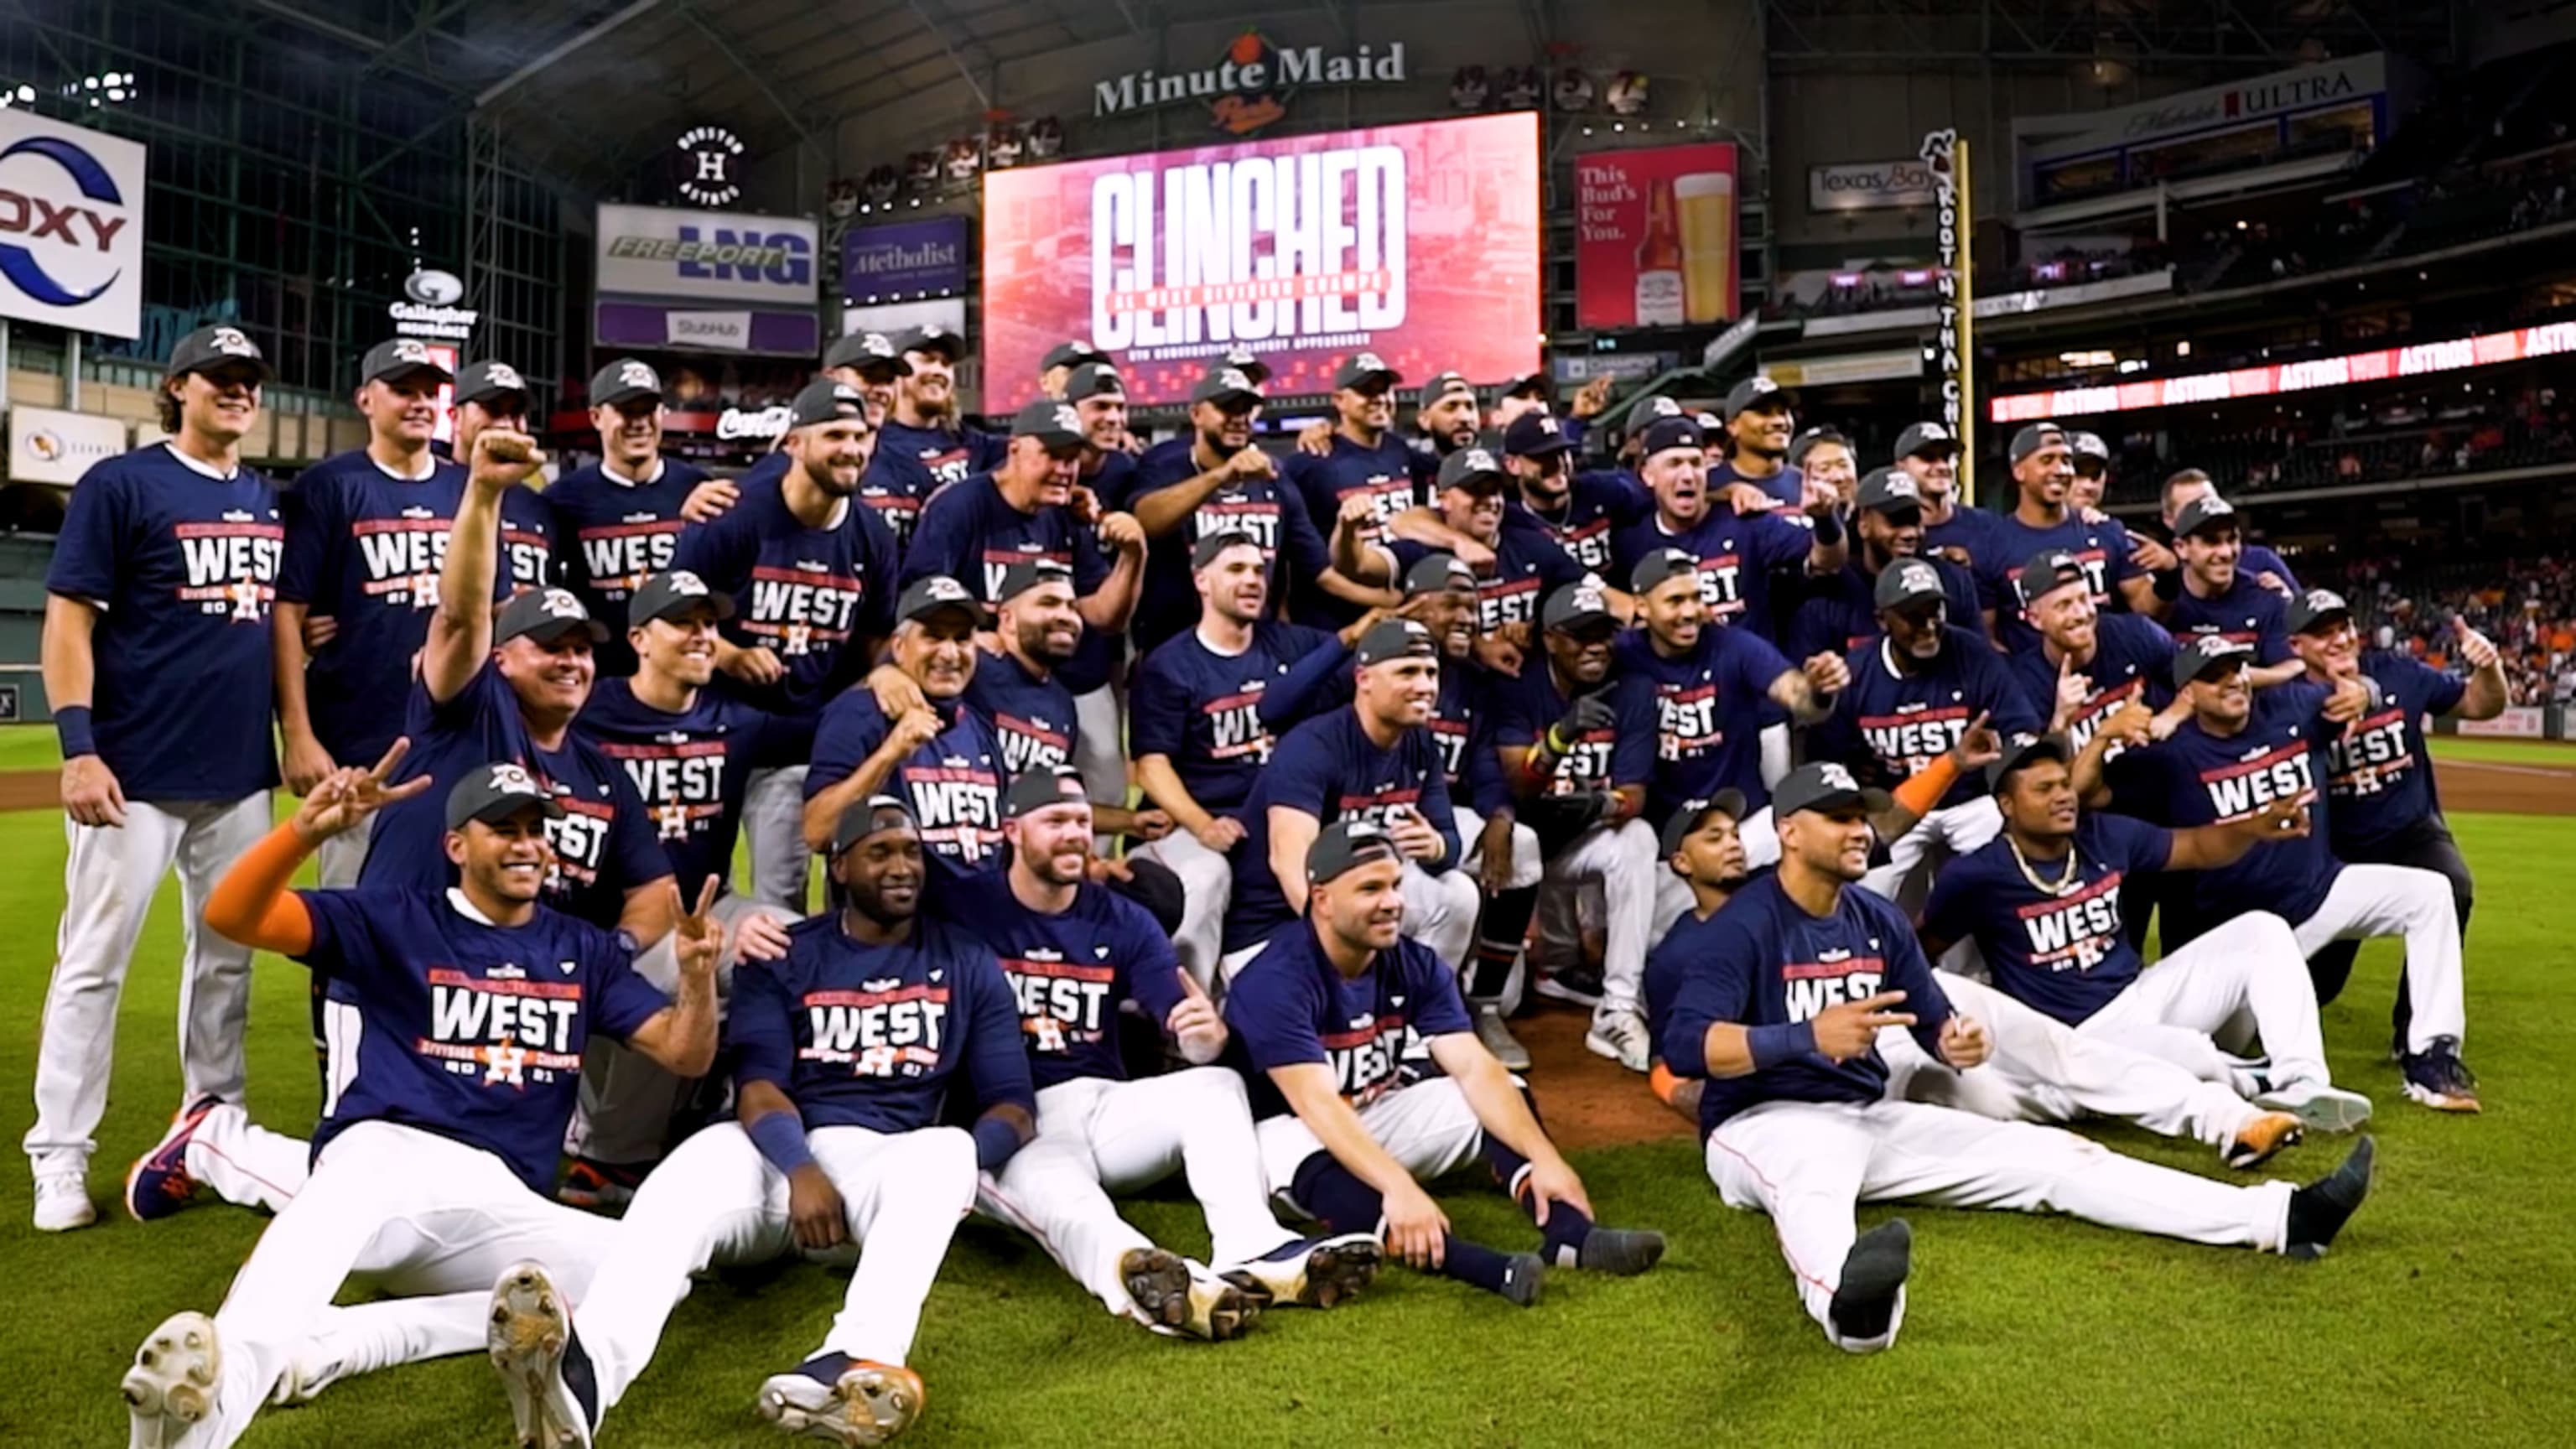 Slogging through 2020, the Astros reach for a postseason spot no one wants  them to have